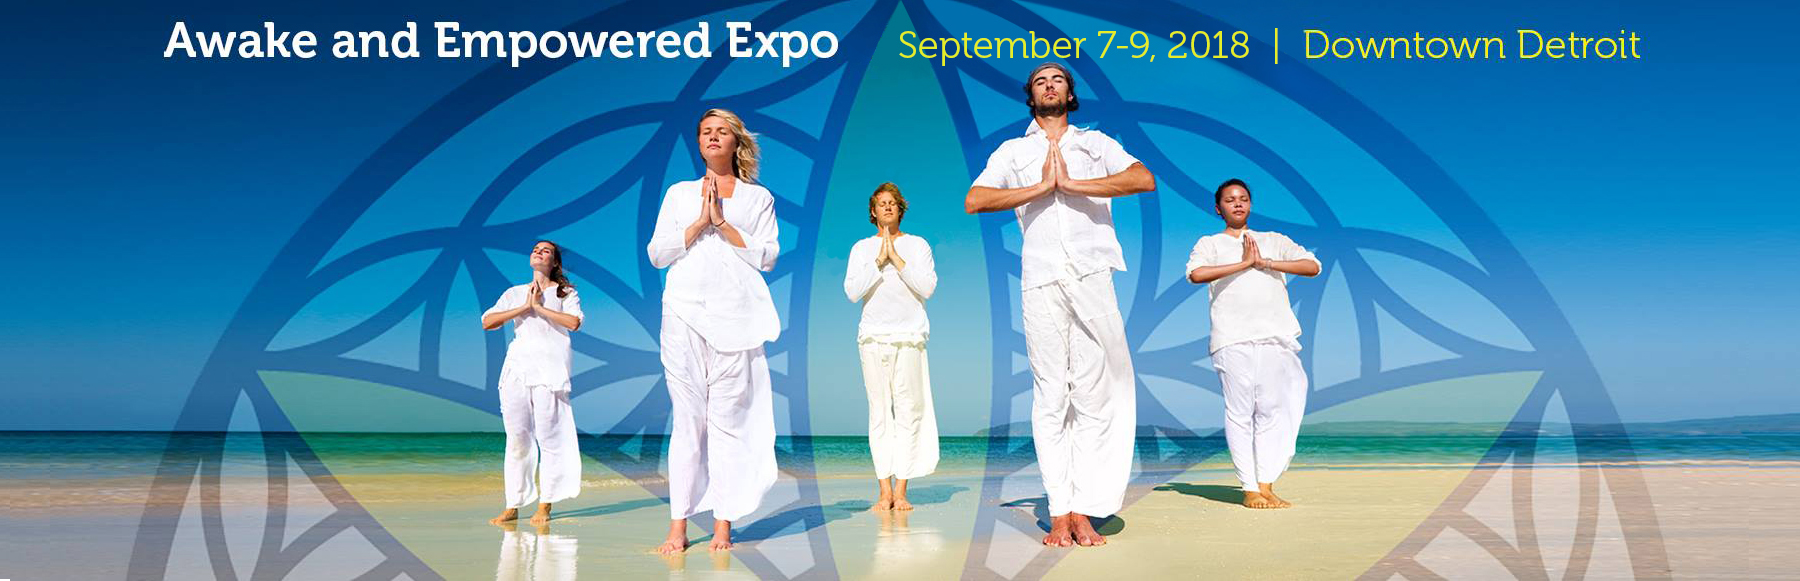 Awake And Empowered Expo banner link to ticket sales